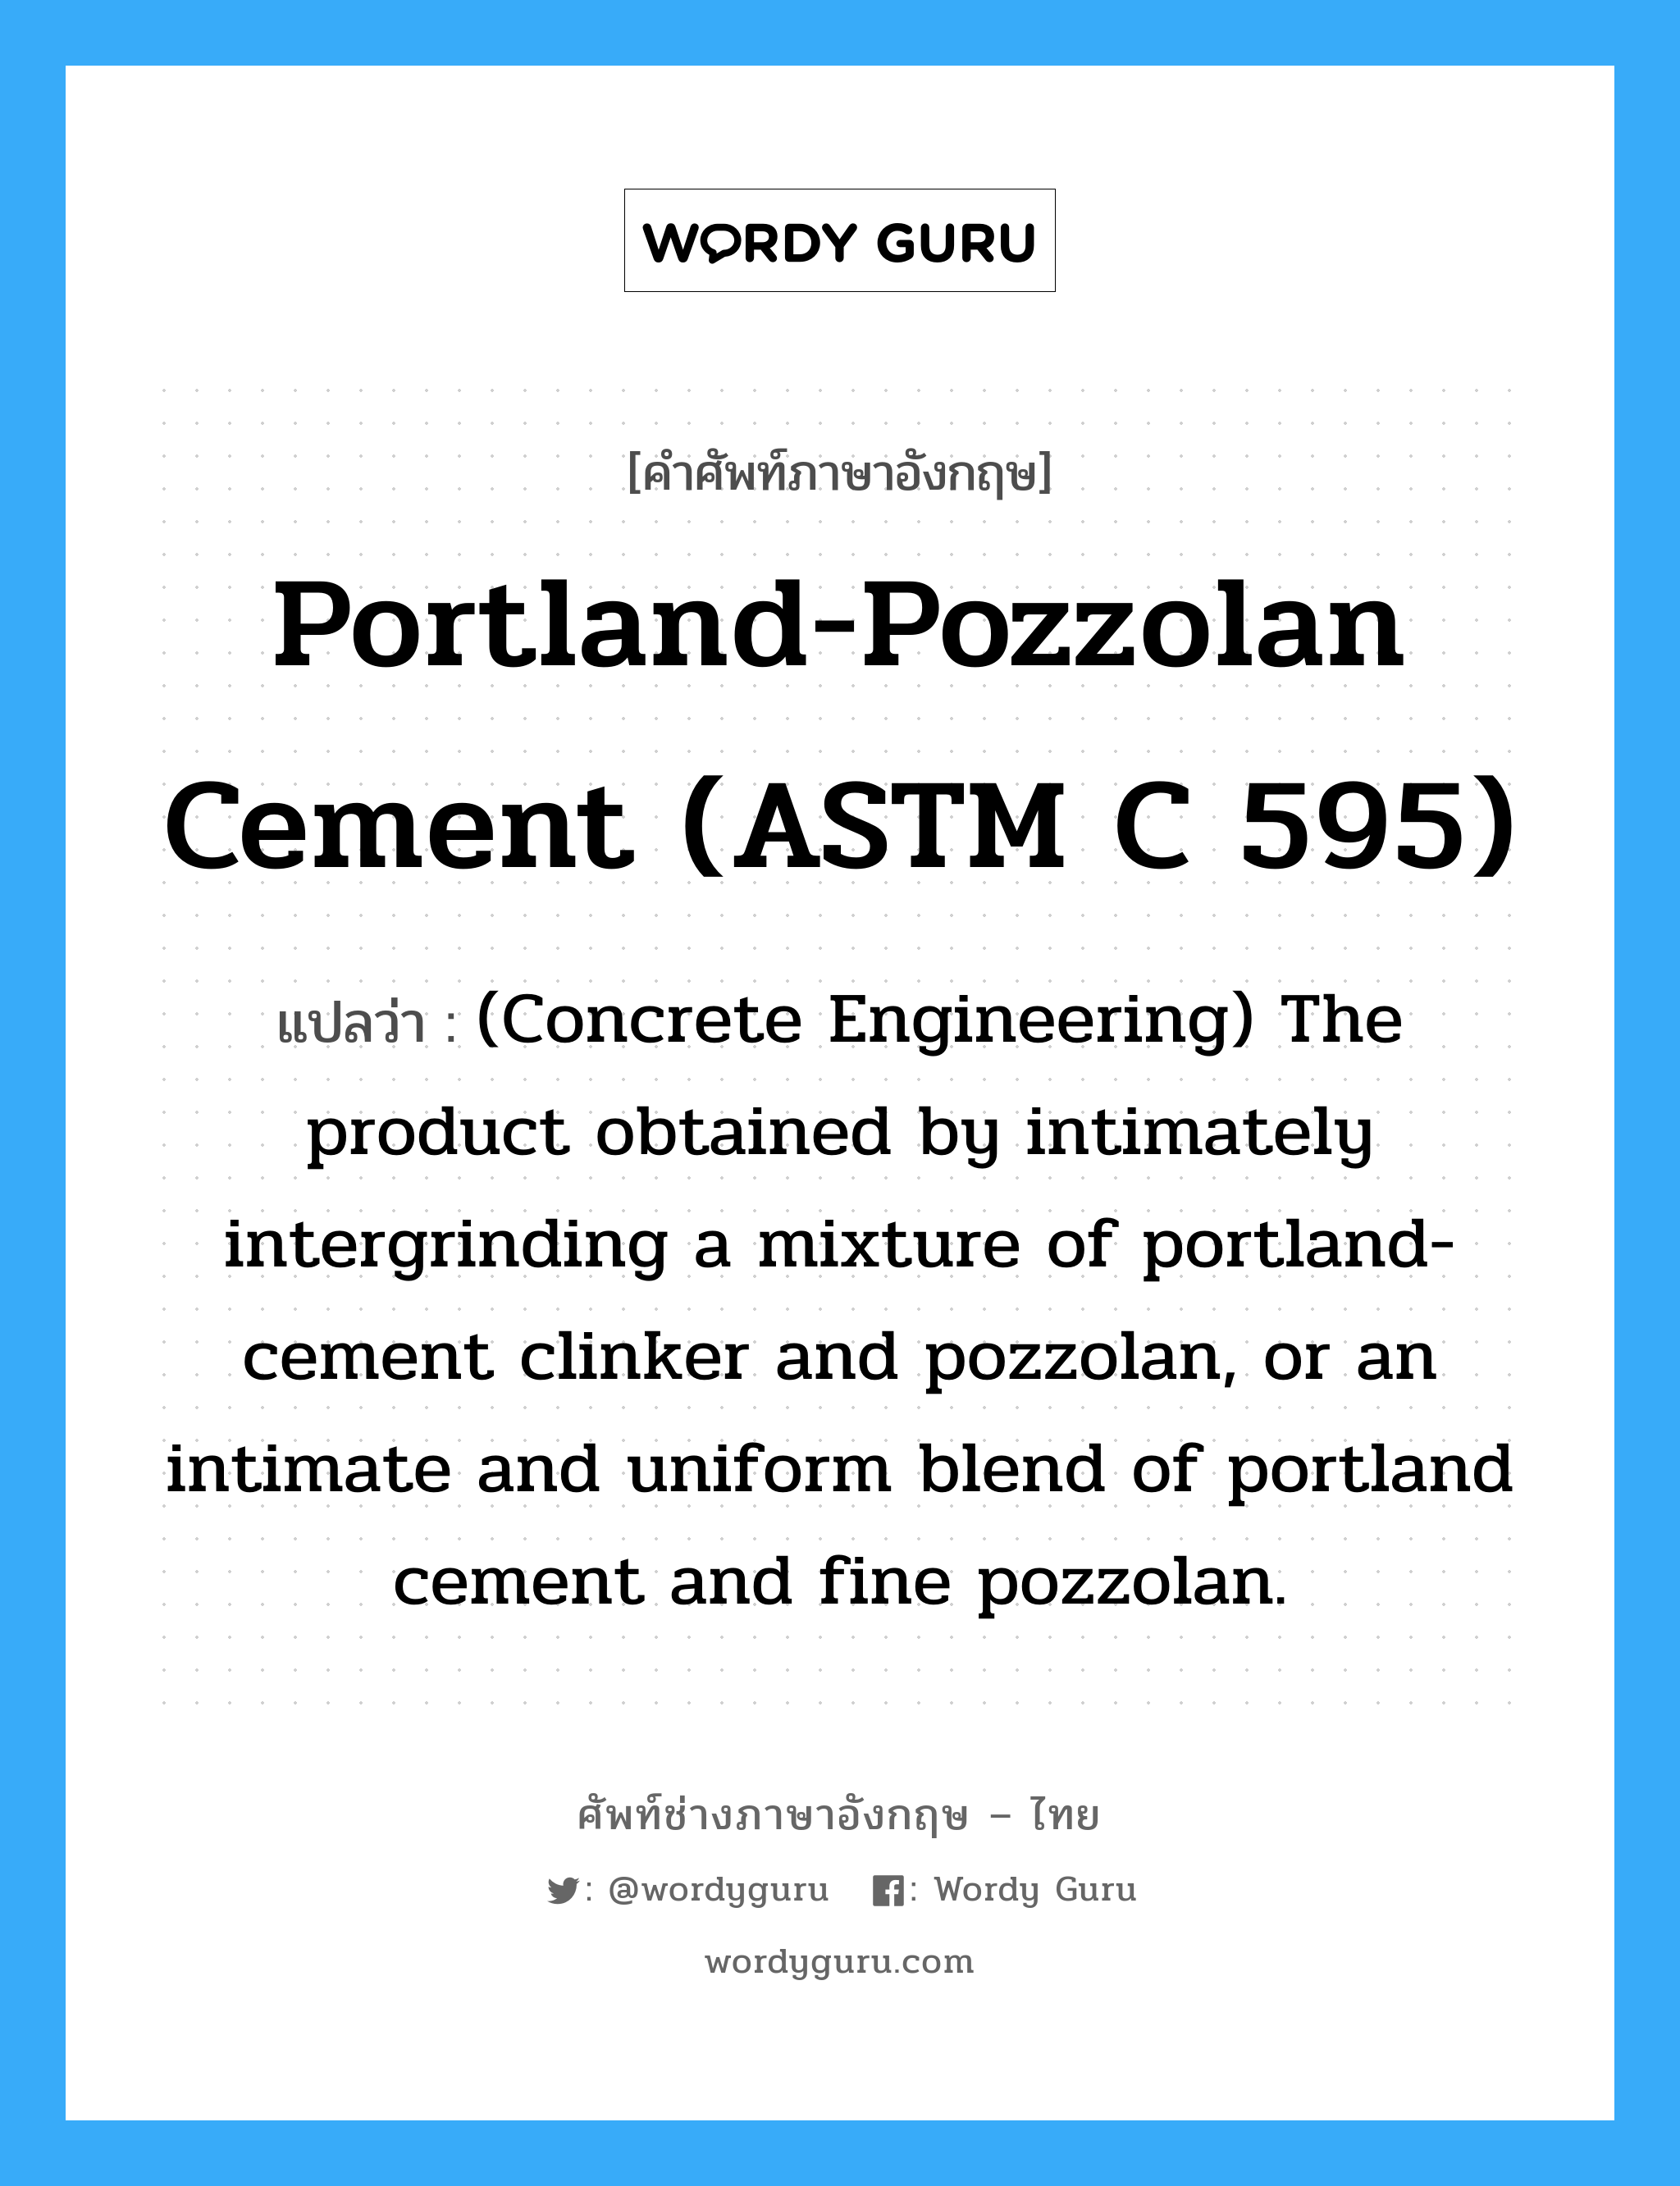 Portland-Pozzolan Cement (ASTM C 595) แปลว่า?, คำศัพท์ช่างภาษาอังกฤษ - ไทย Portland-Pozzolan Cement (ASTM C 595) คำศัพท์ภาษาอังกฤษ Portland-Pozzolan Cement (ASTM C 595) แปลว่า (Concrete Engineering) The product obtained by intimately intergrinding a mixture of portland-cement clinker and pozzolan, or an intimate and uniform blend of portland cement and fine pozzolan.